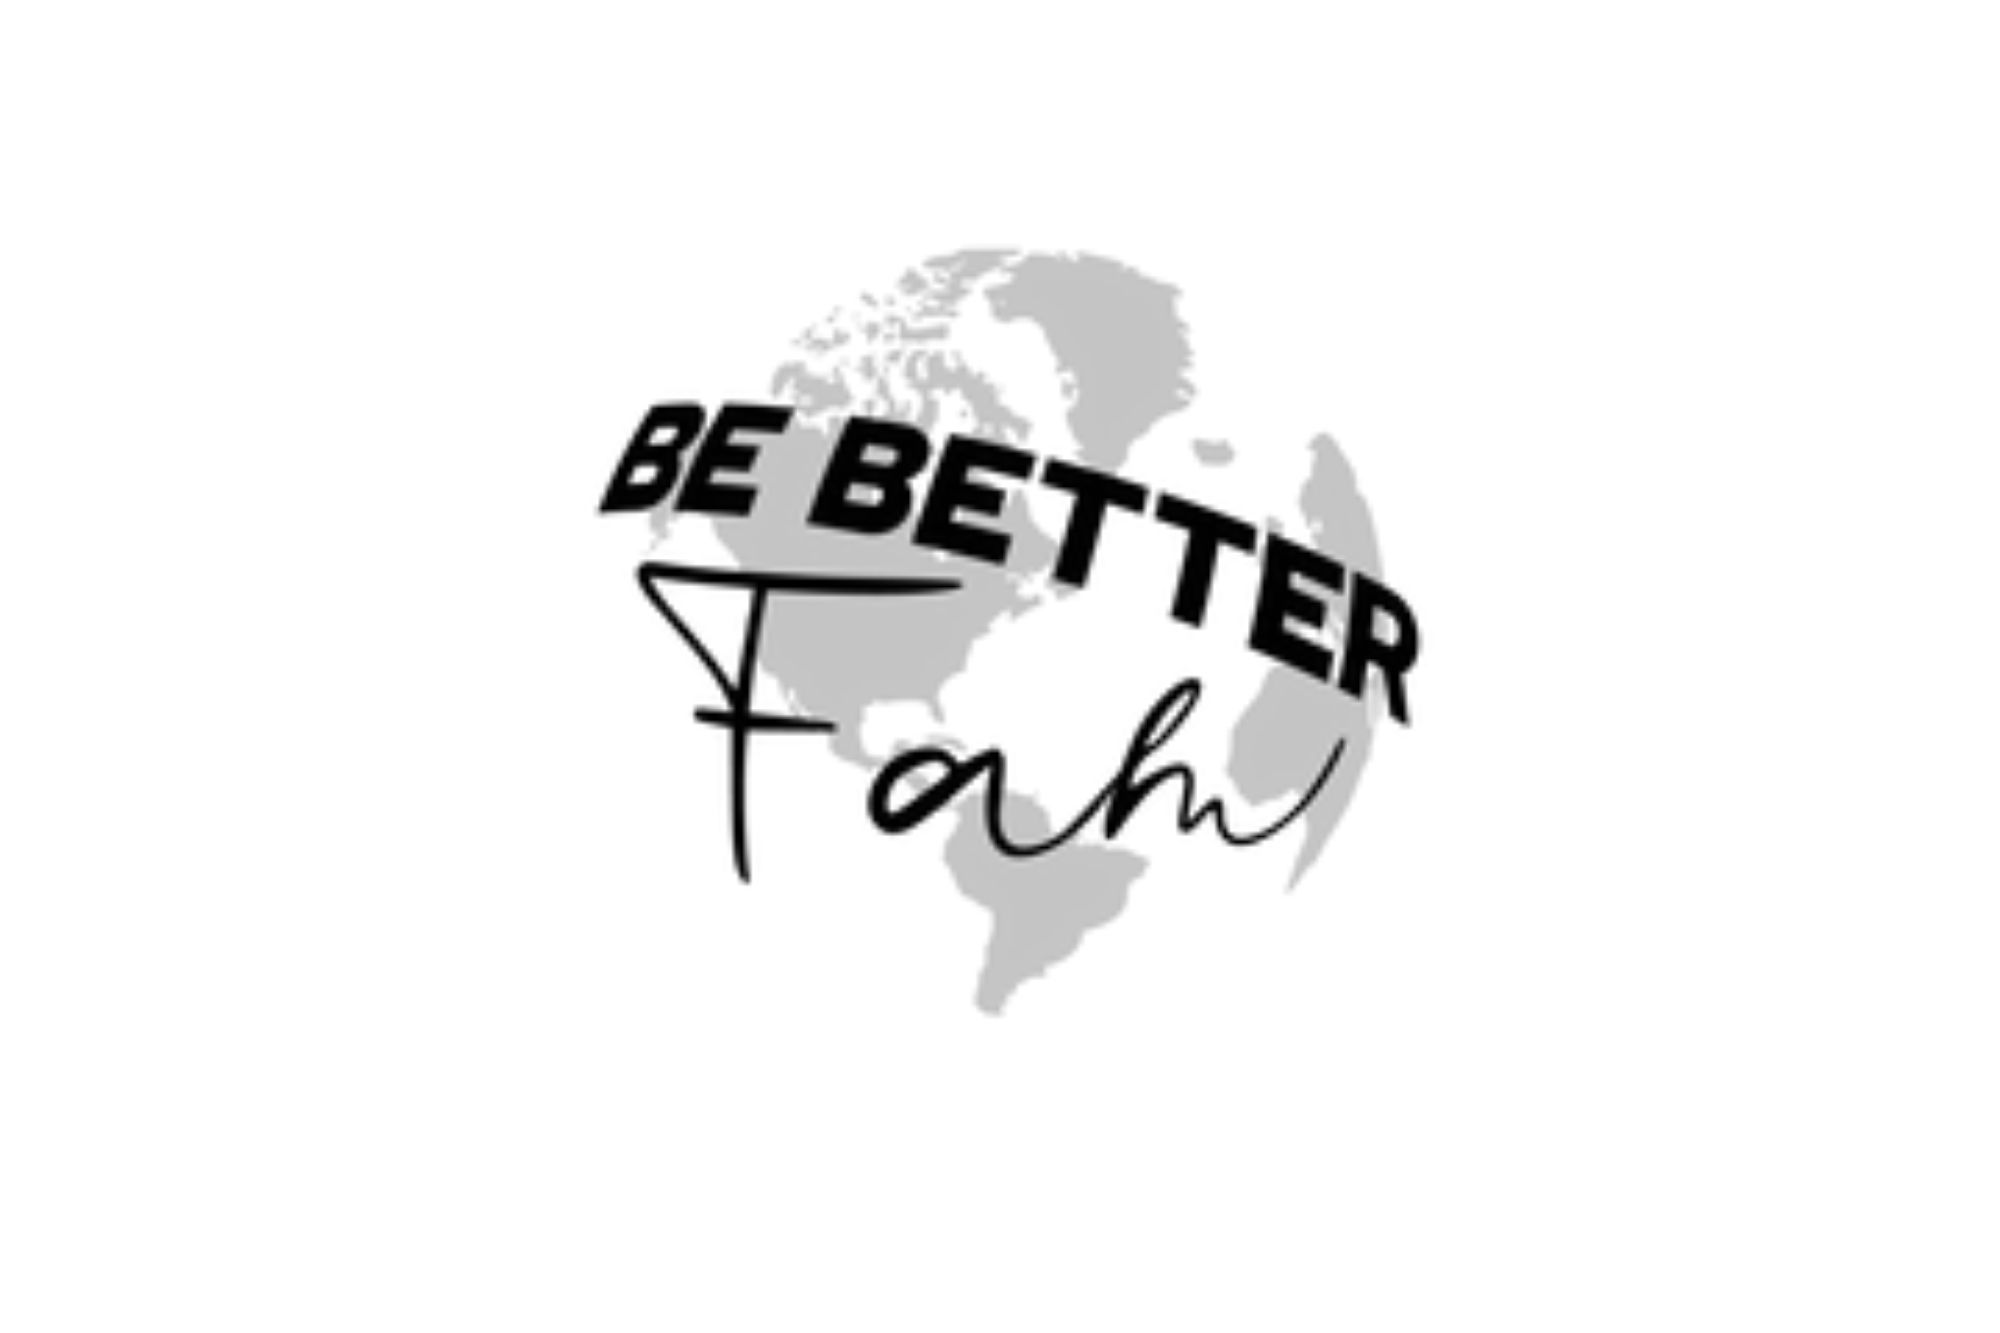 Be Better Fam Clothing and Accessories